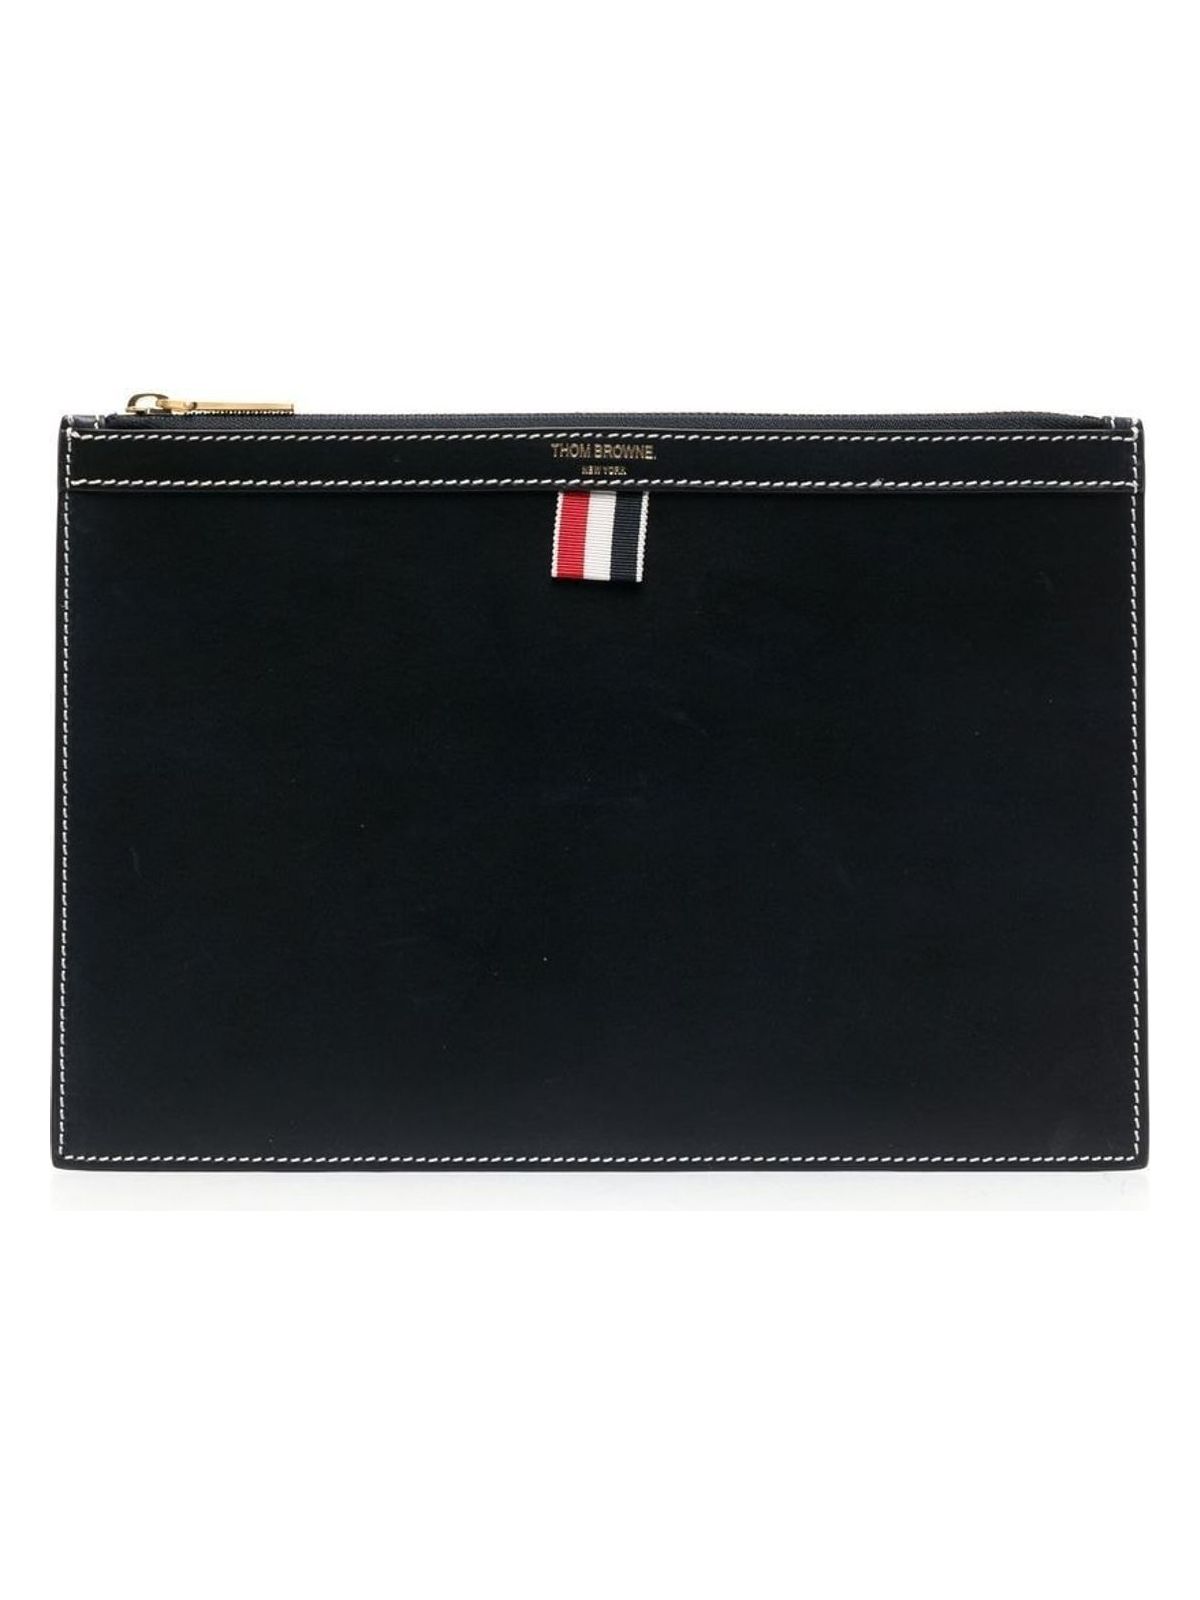 L0044415 THOM BROWNE SMALLE LEATHER DOCUMENT CASE